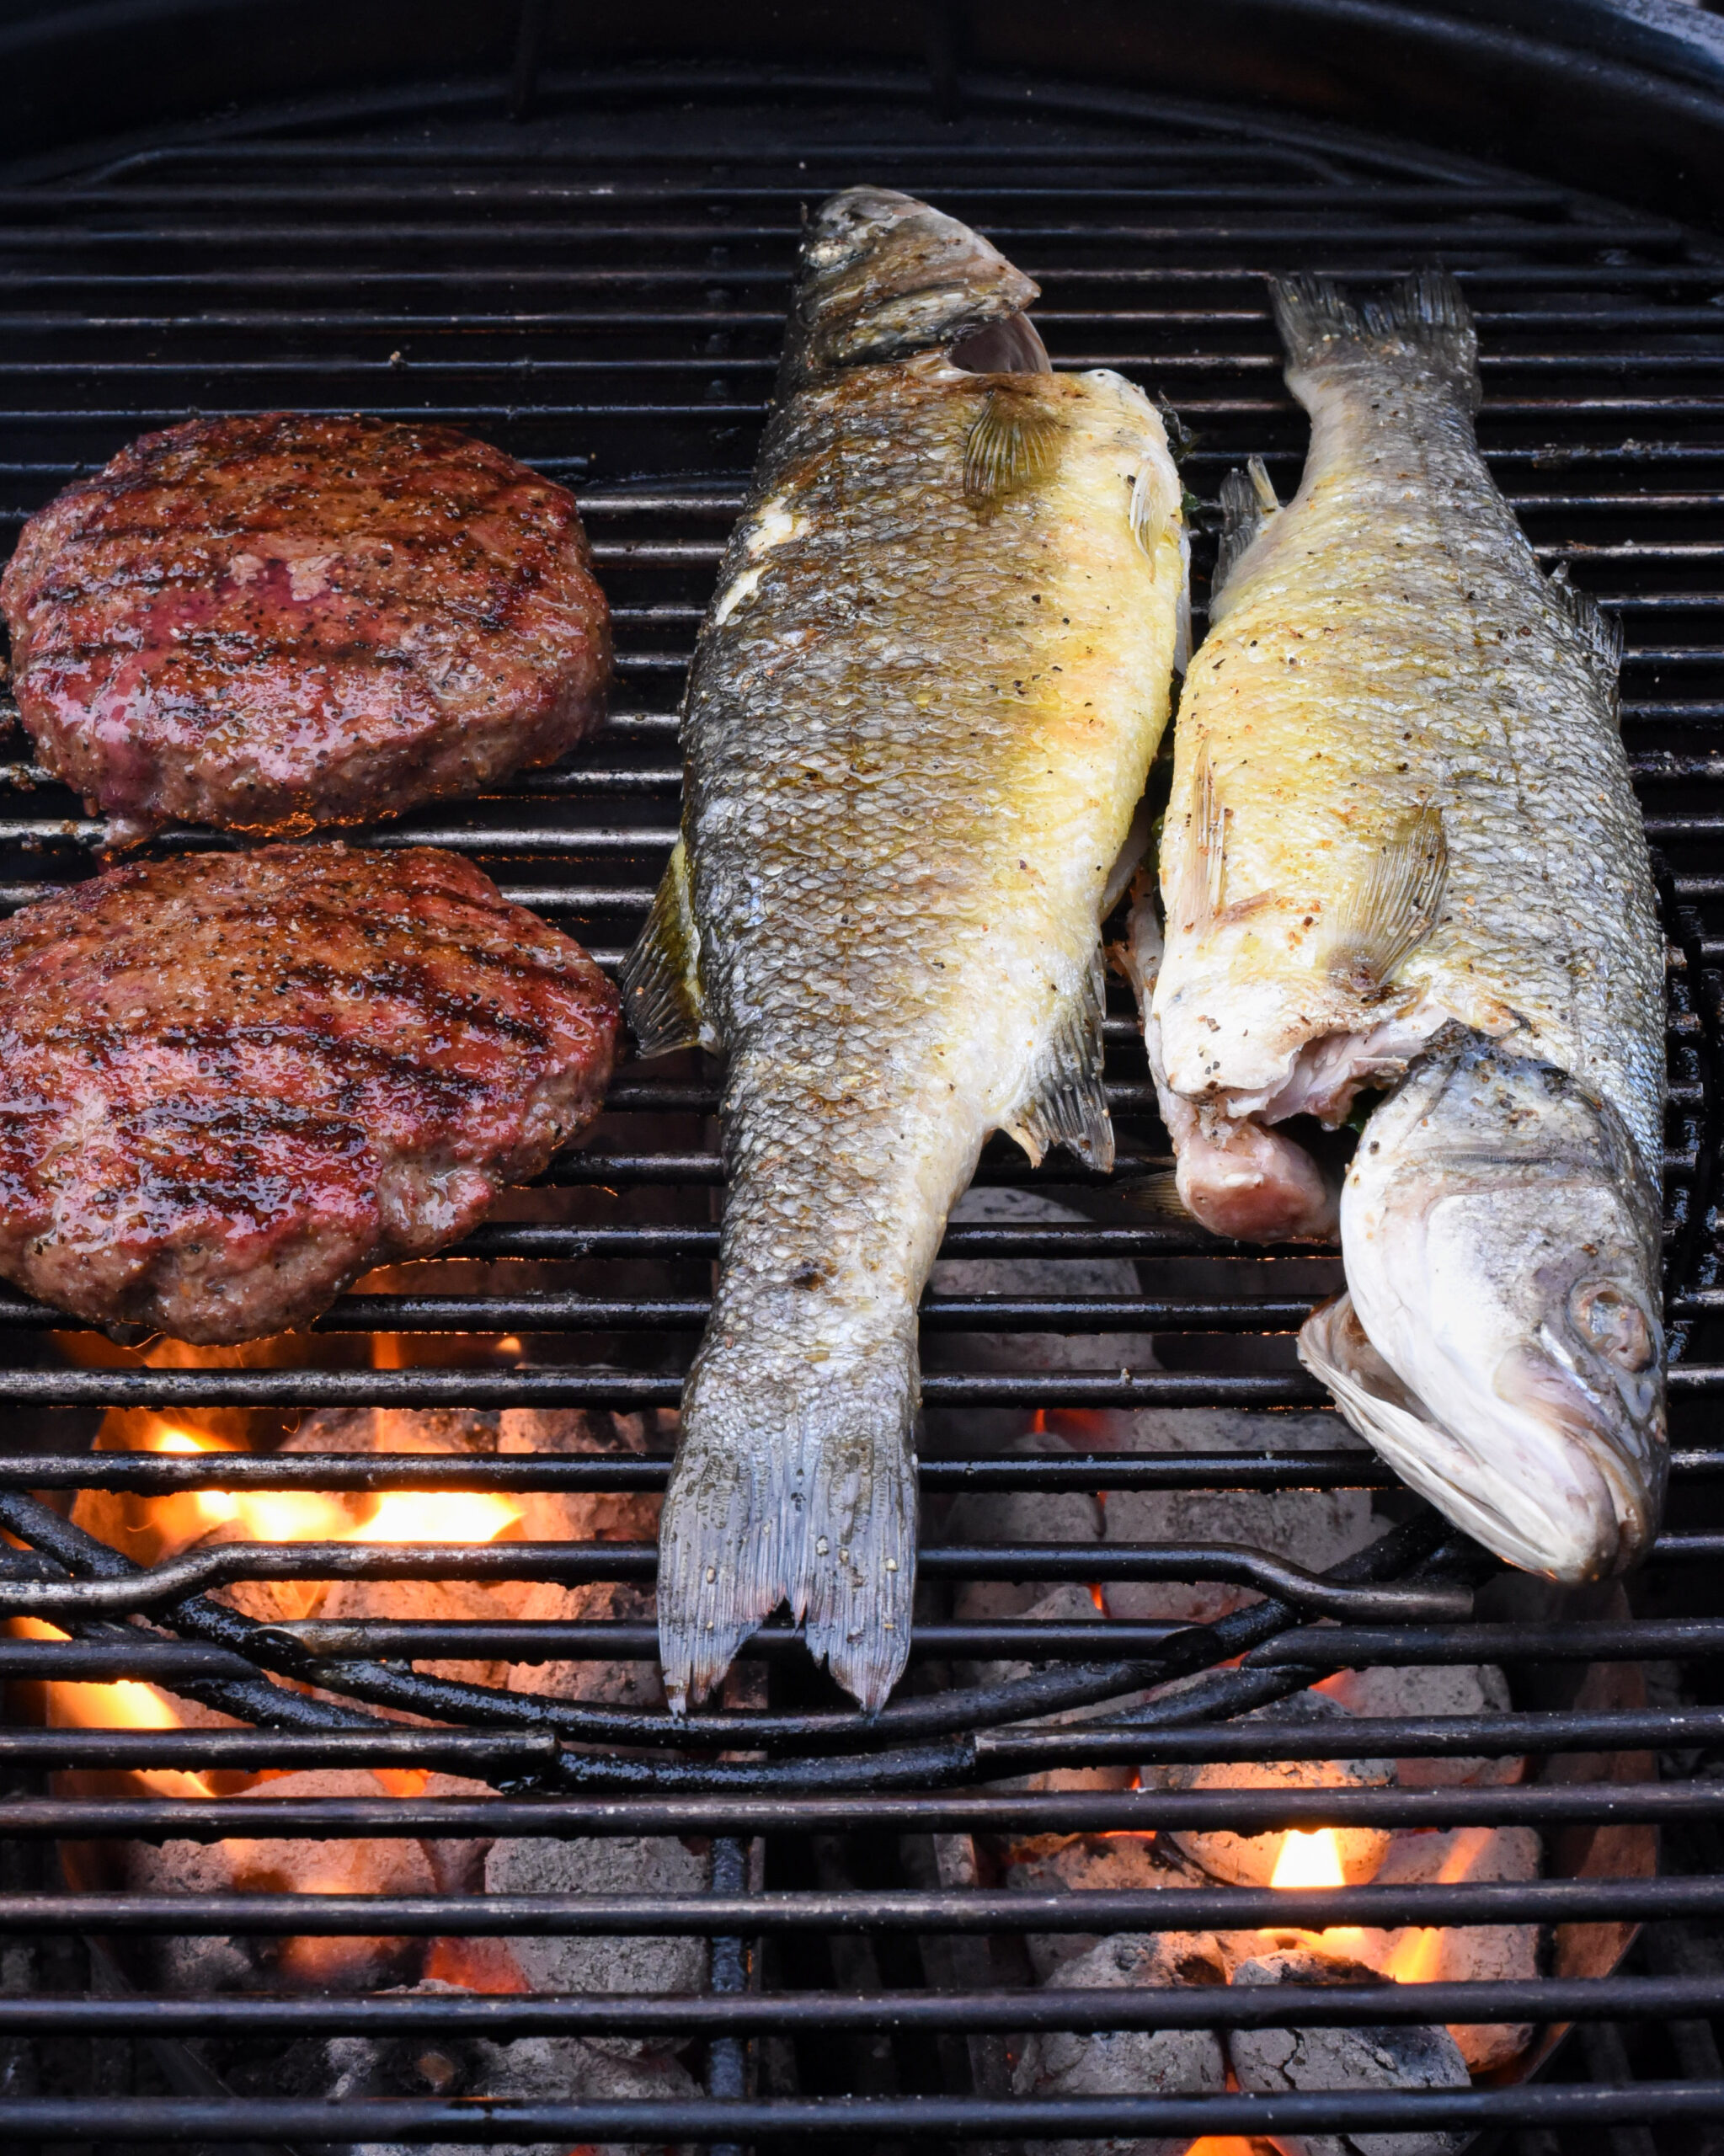 Two whole fish and two burgers on the grill.